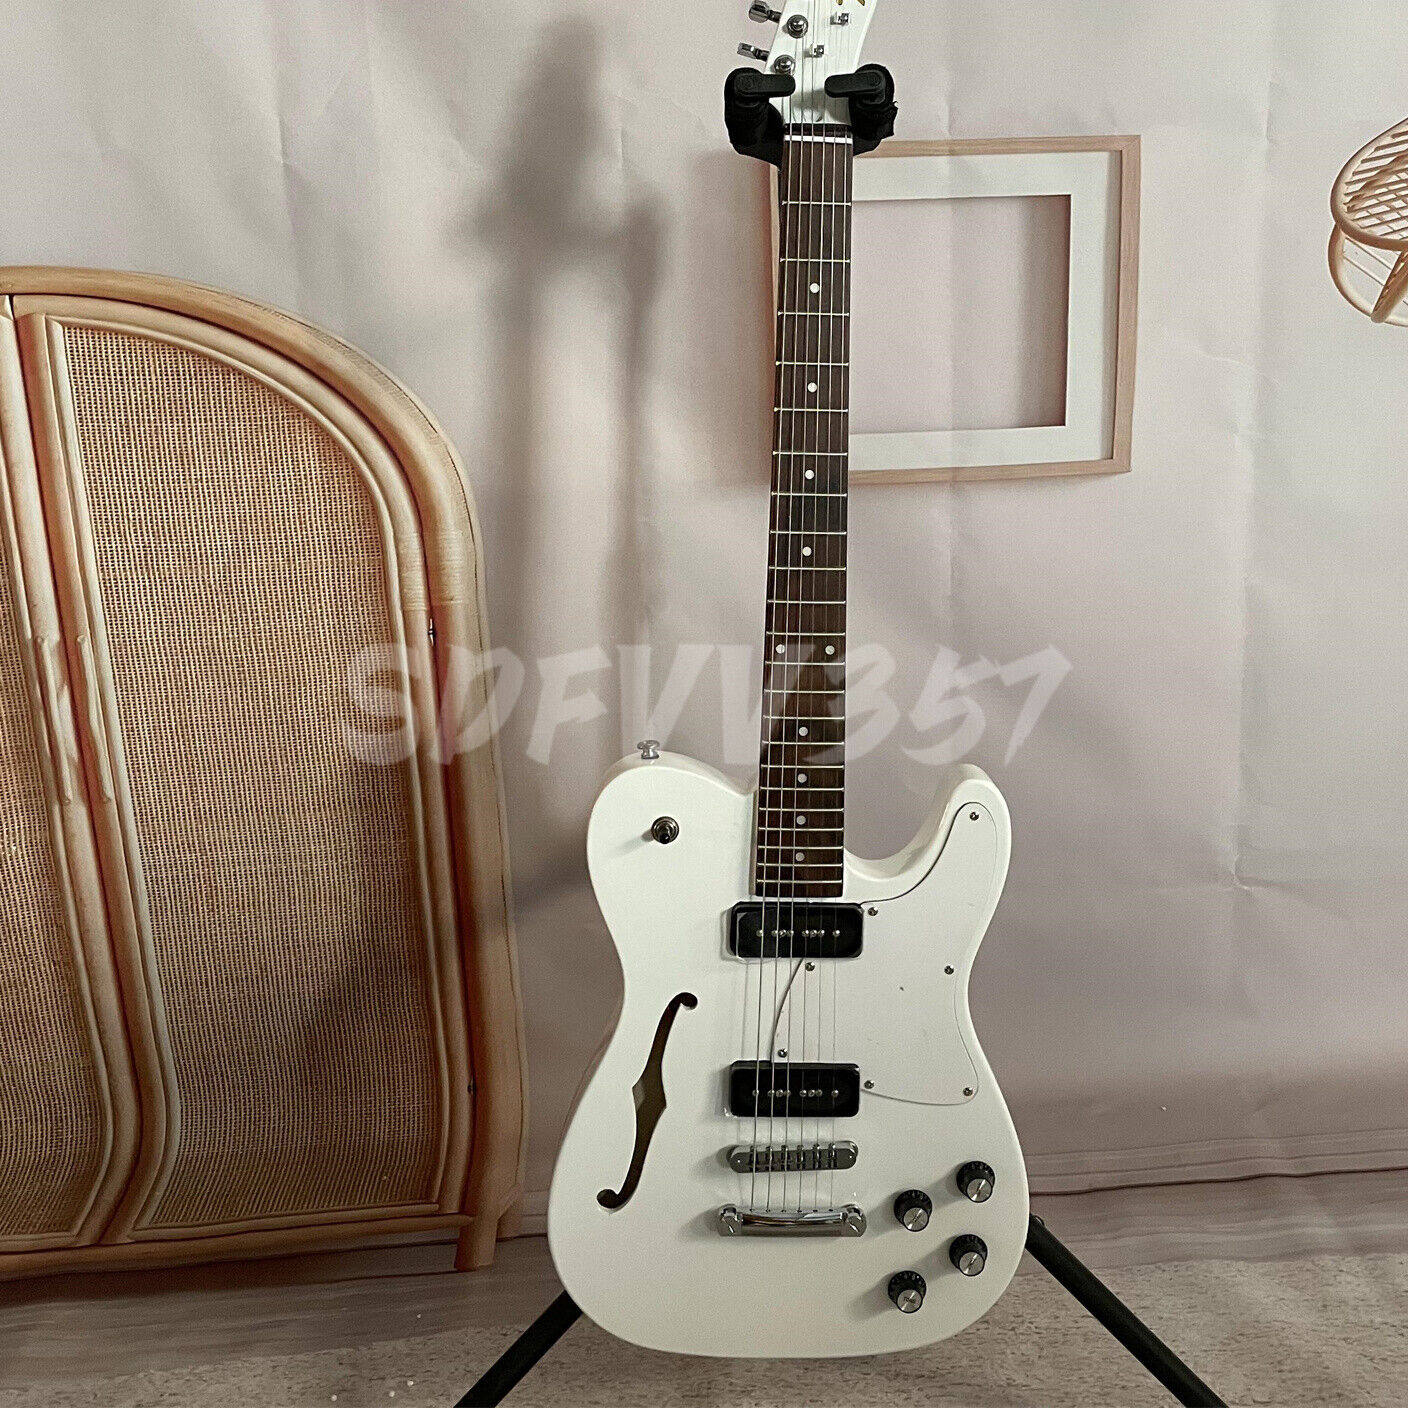 Semi Hollow Body TL Electric Guitar 2P90 Pickups White Basswood Body 6 String